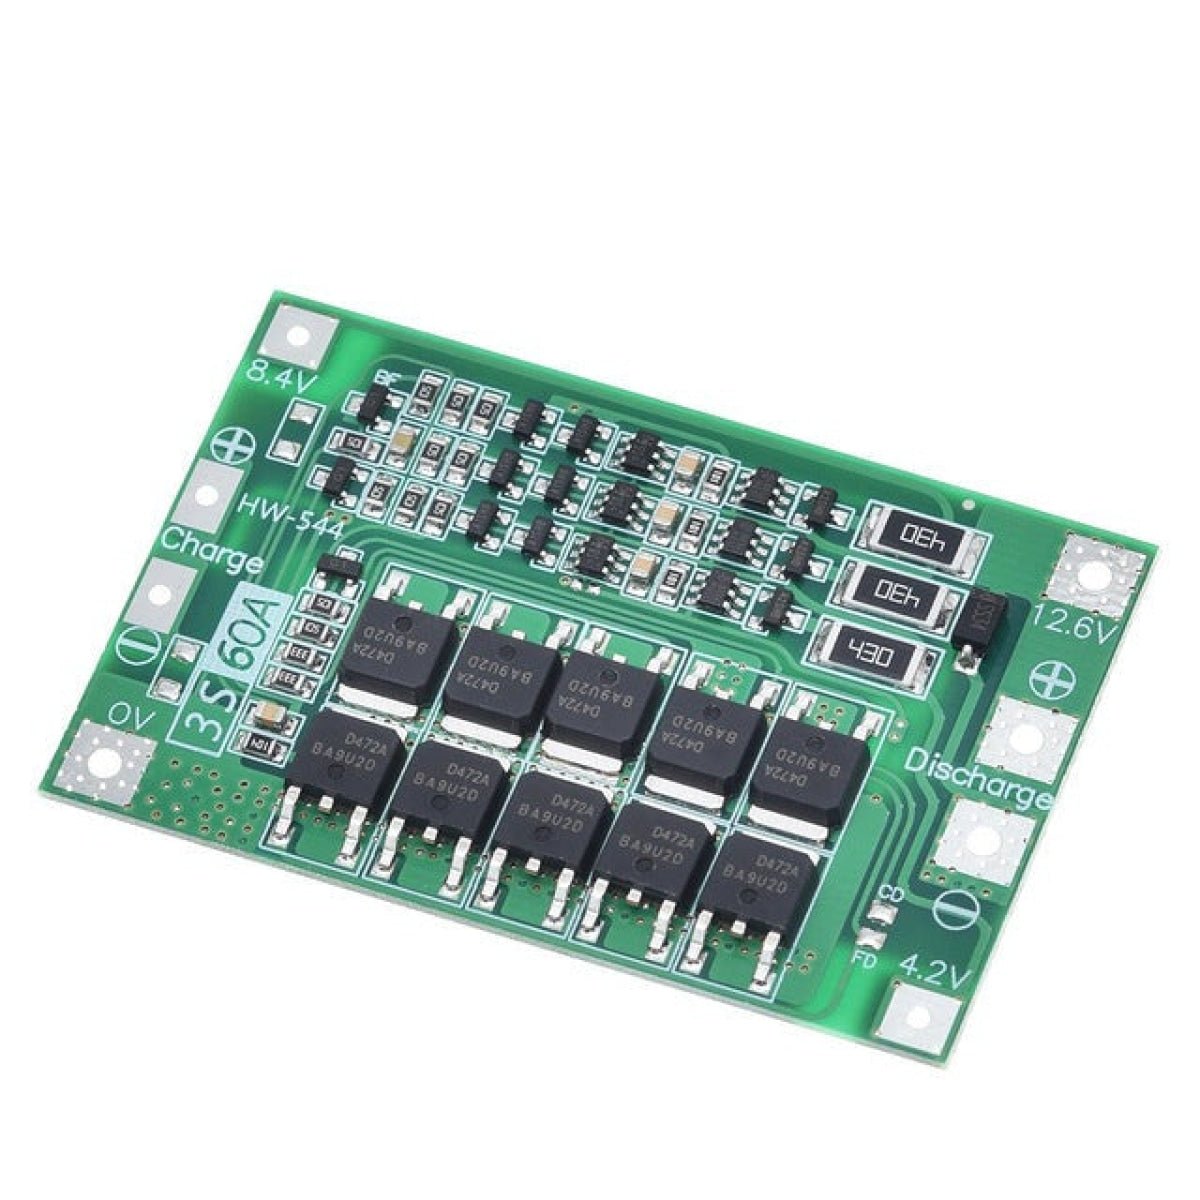 1pcs or Set 3S 4S 40A 60A Li-ion Lithium Battery Charger Protection Board 18650 BMS For Drill Motor Enhance Balance 11.1V 12.6V/14.8V 16.8V - 3S 60A Balance - - Asia Sell